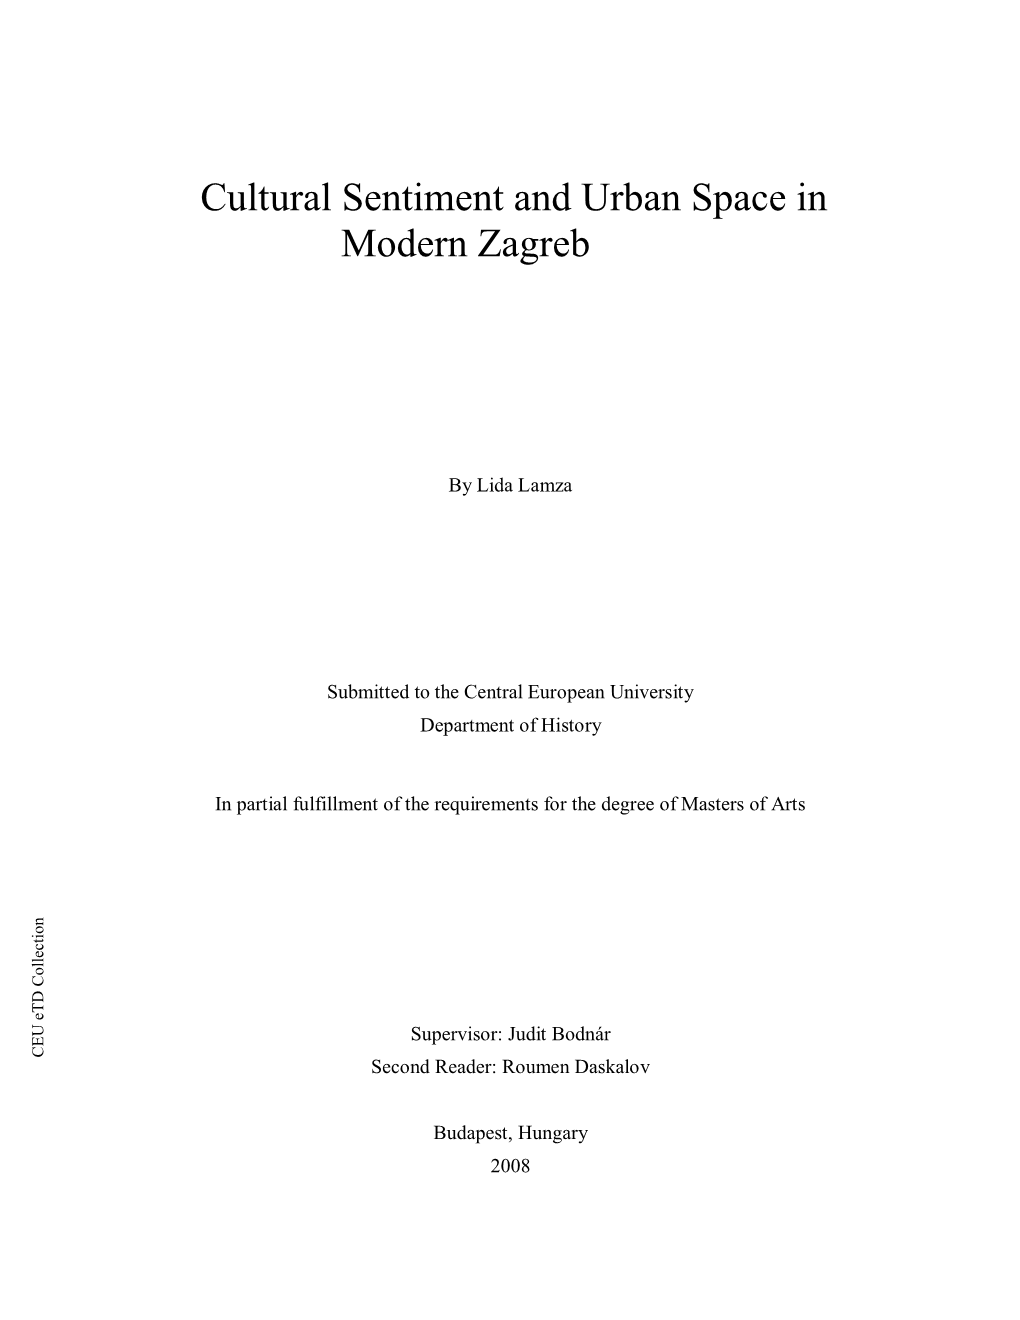 Cultural Sentiment and Urban Space in Modern Zagreb